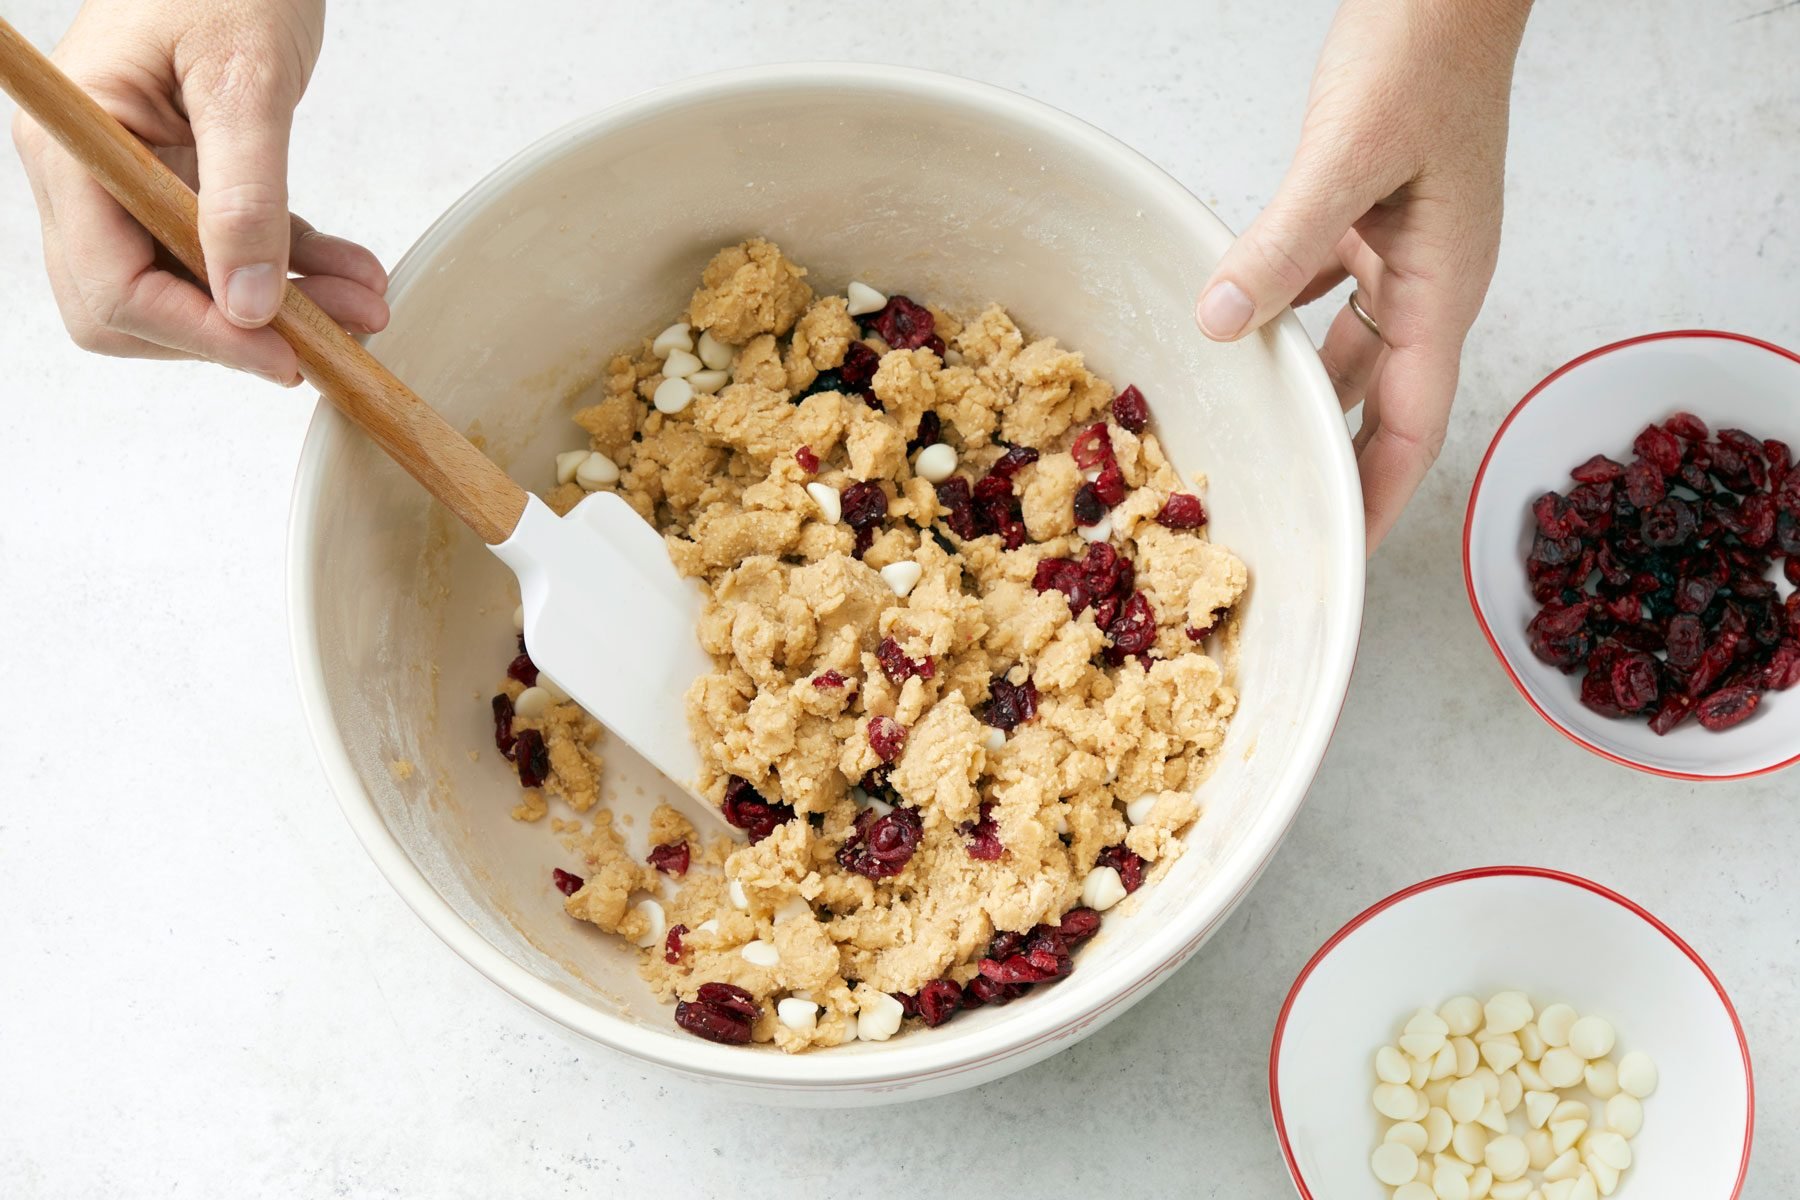 Cranberries and white chocolate chips mixture in a large bowl